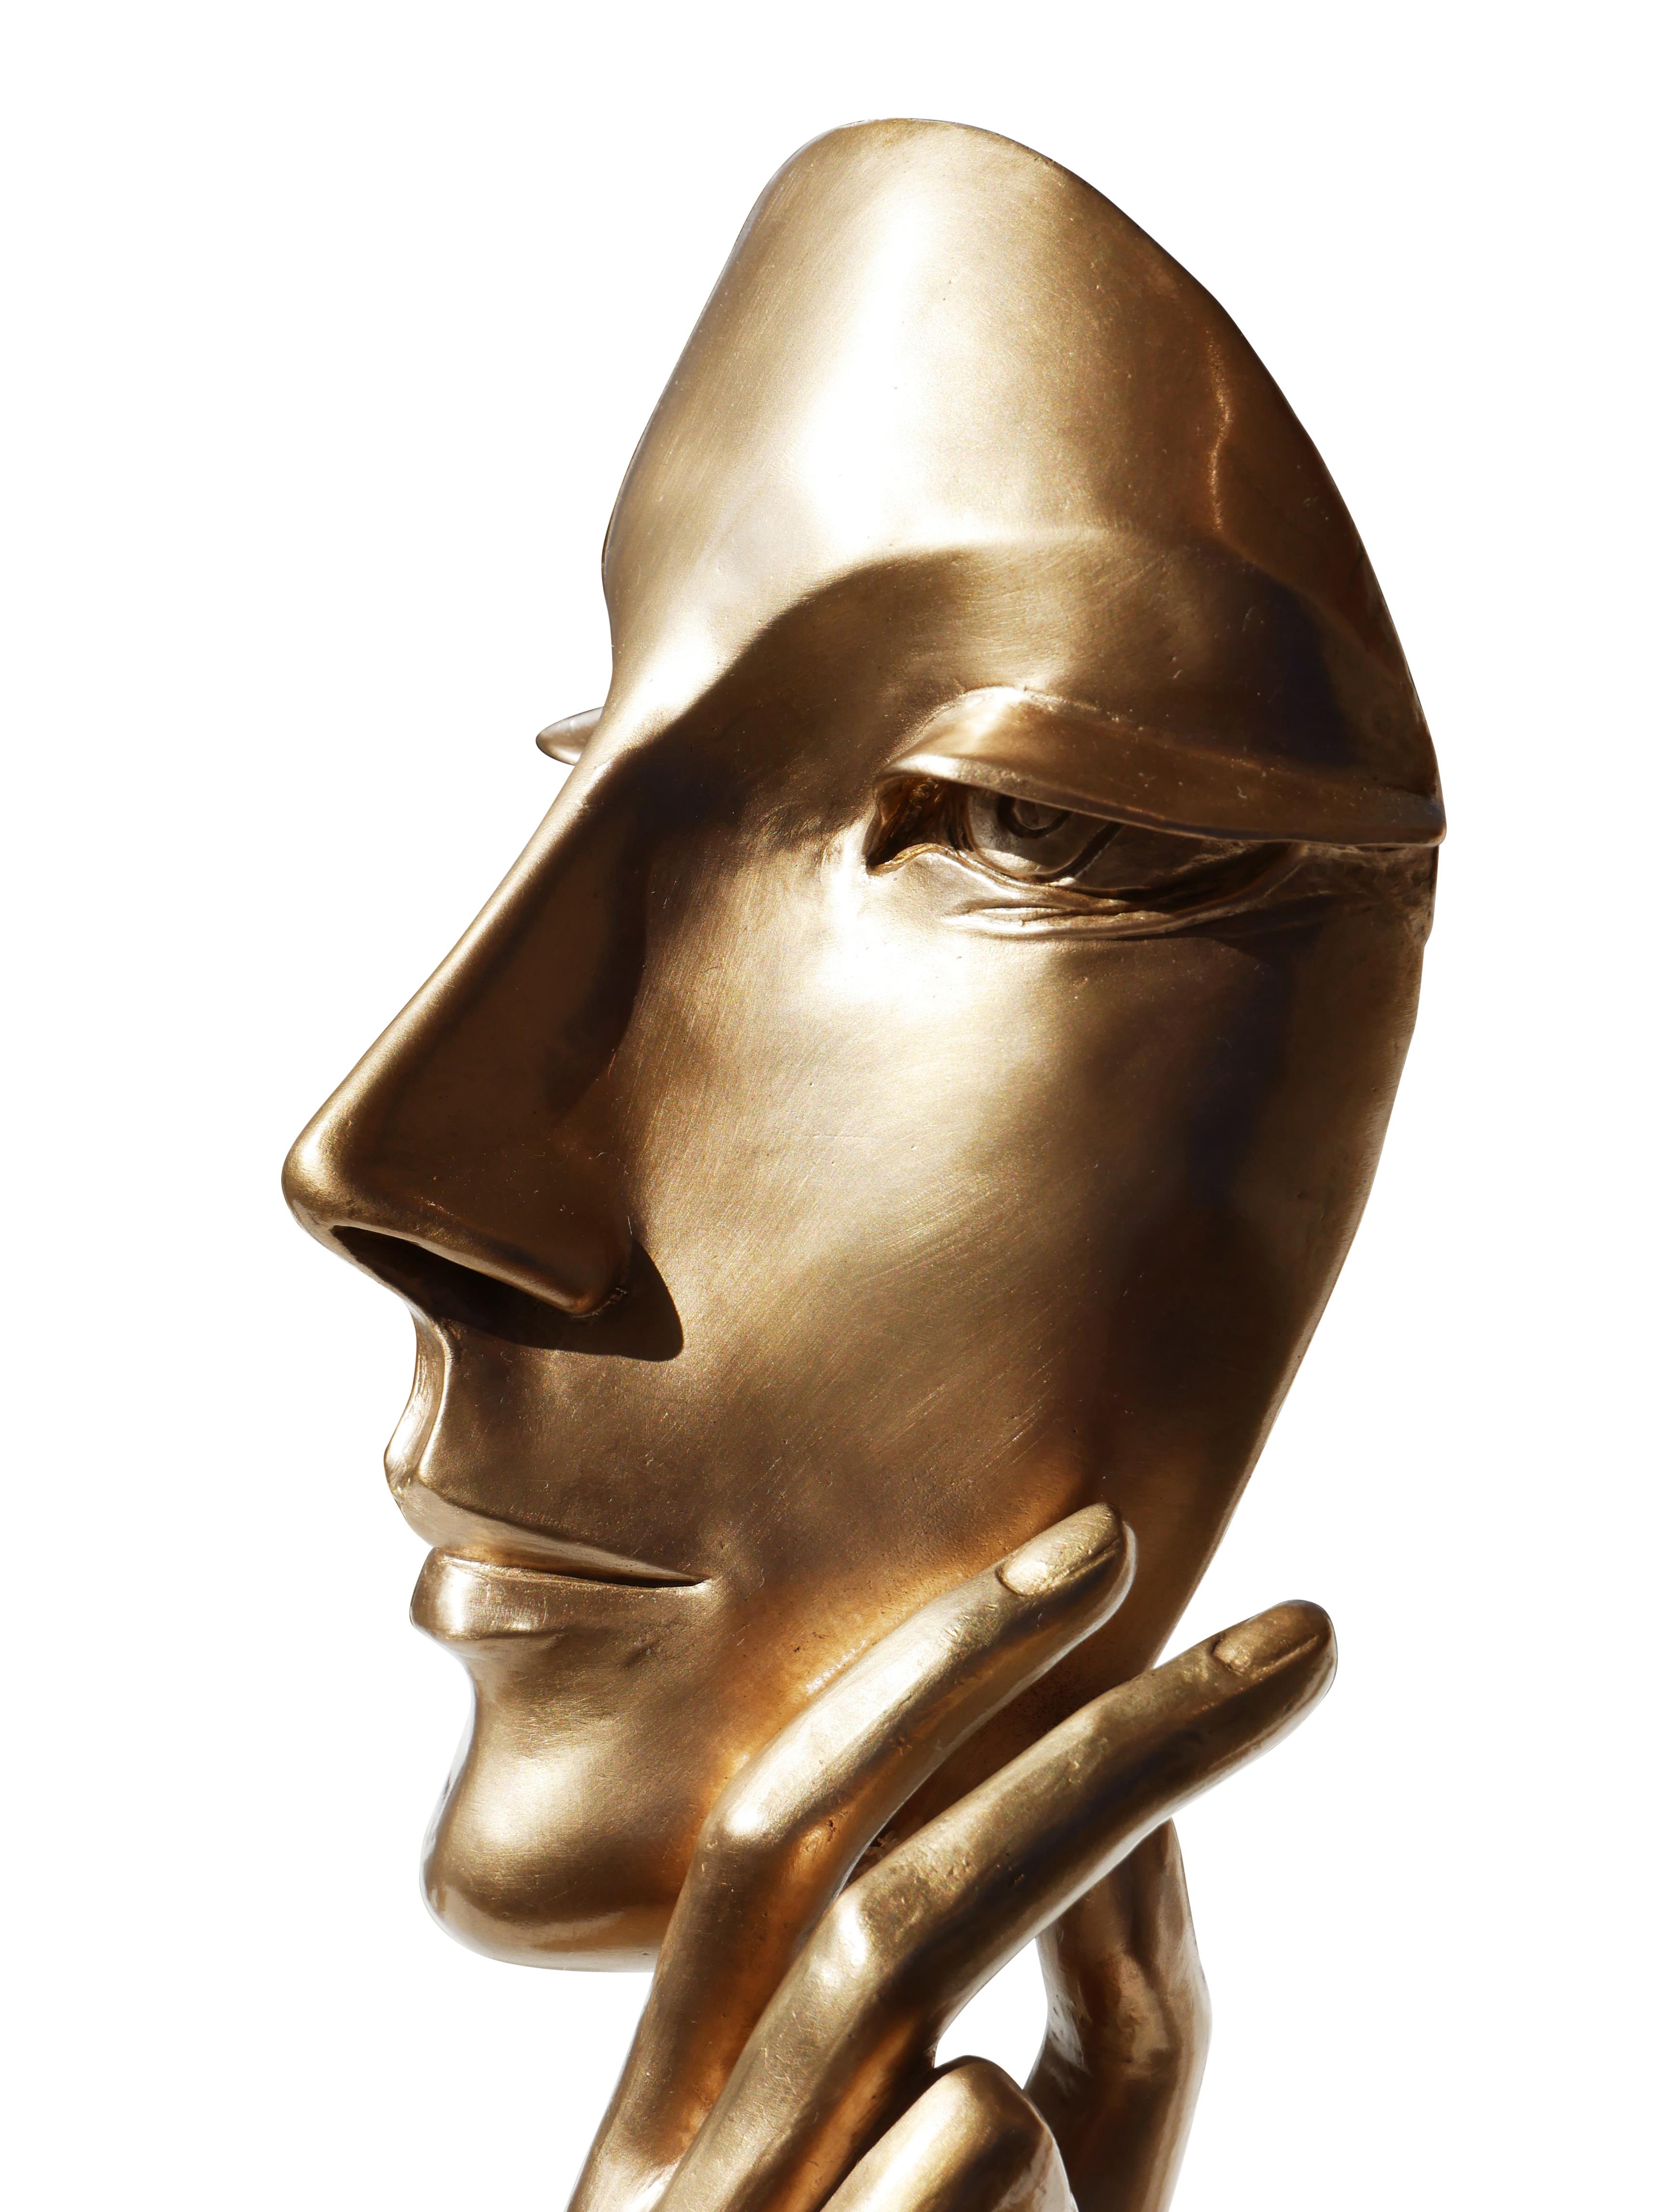 Abstract modernist figurative bronze sculpture by Houston, TX artist David Adickes. This sculpture depicts an abstract mask or face supported by an arm. The main sculpture rests on top of a wooden base. Signed by the artist at the bottom of the arm.